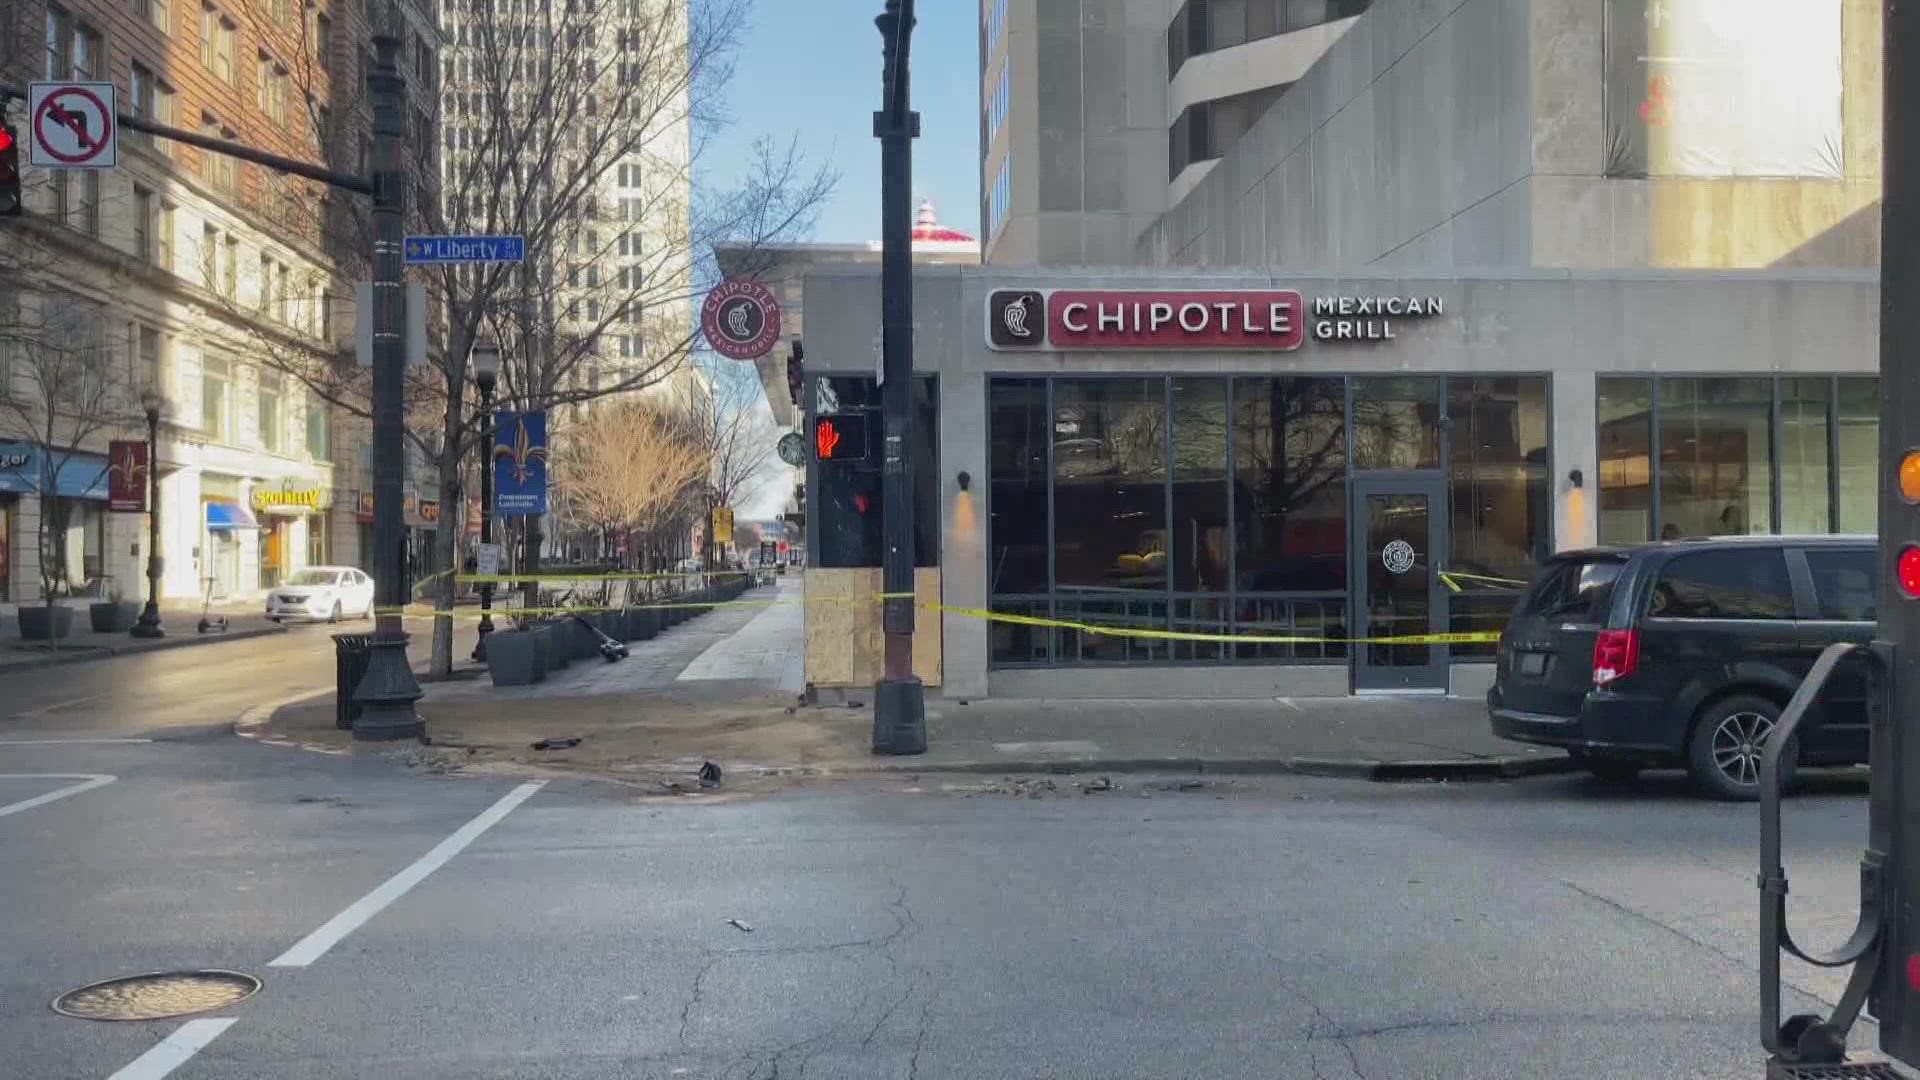 Louisville Metro Police said the damage was from an incident involving two cars on Liberty Street.